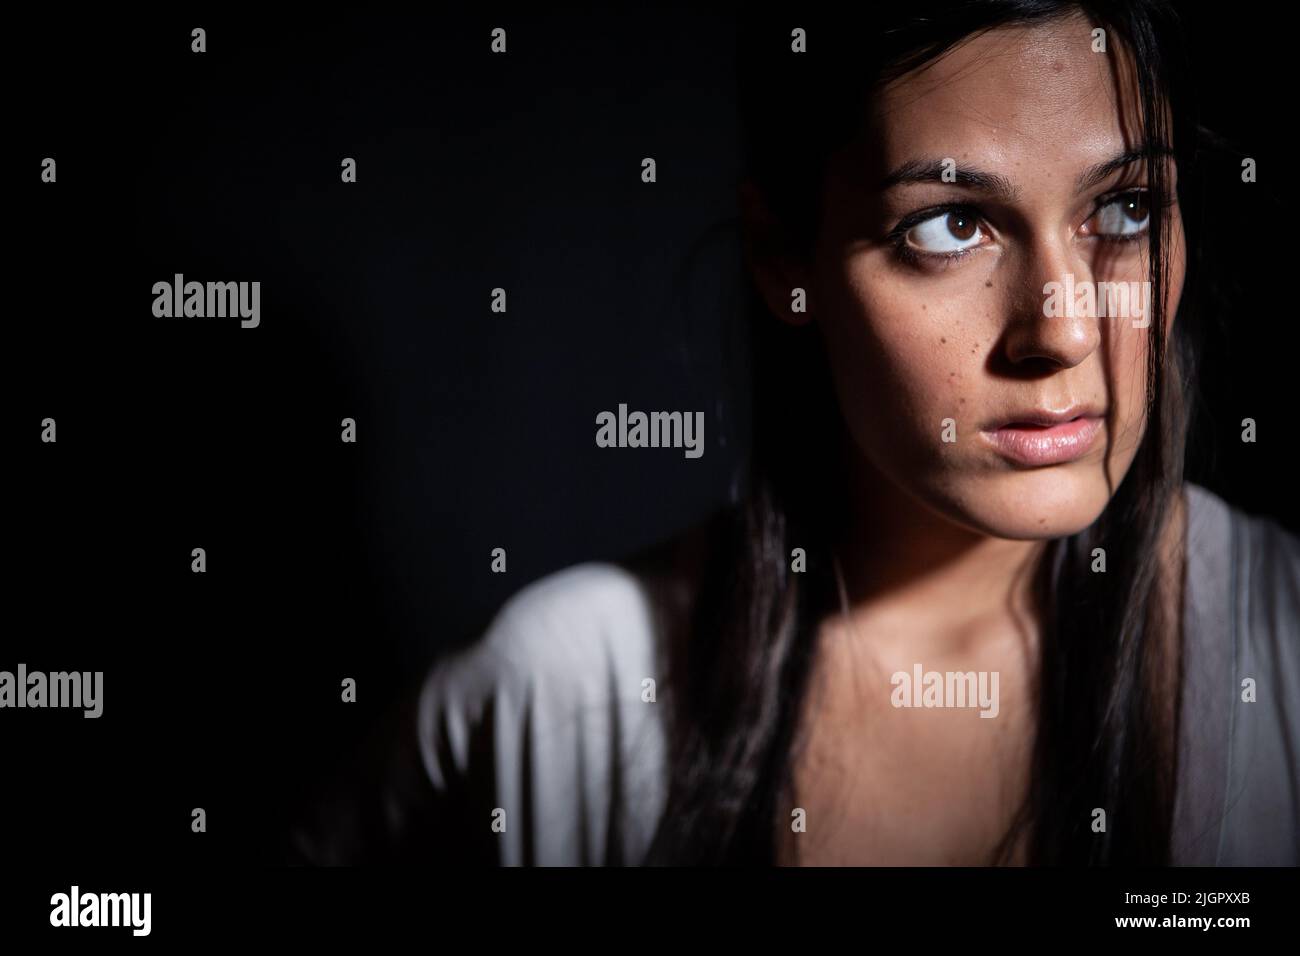 Dark Fear. A concerned look on the face of a beautiful young mixed-race Anglo-Indian female model in a dark place. From a series with the same model. Stock Photo